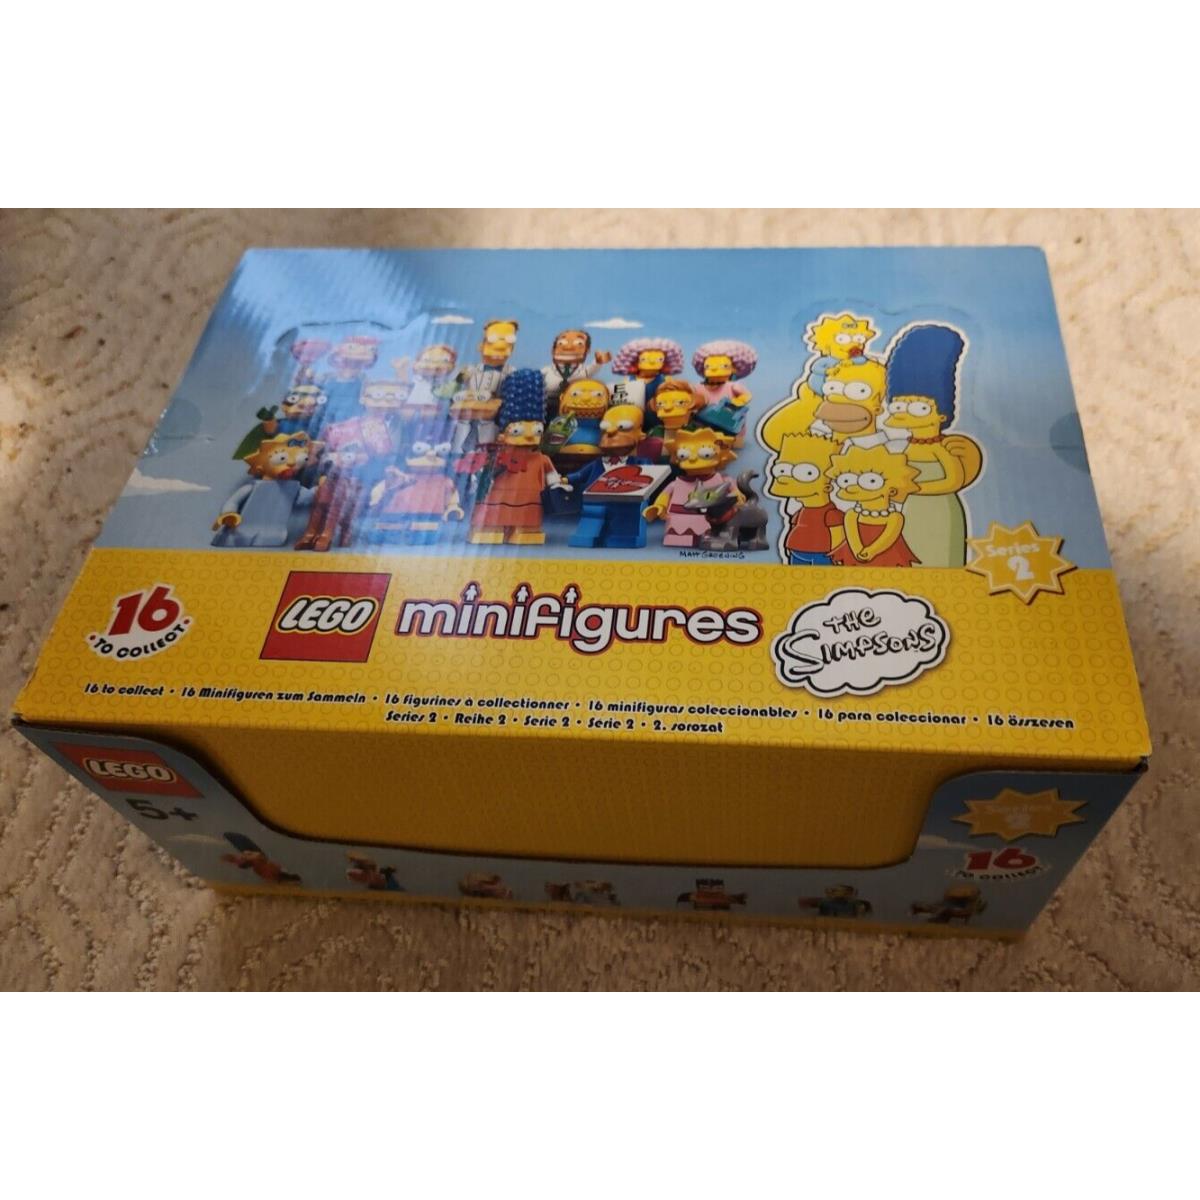 Case/box - Lego 71009 The Simpsons Series 2 Collectible Minifigures